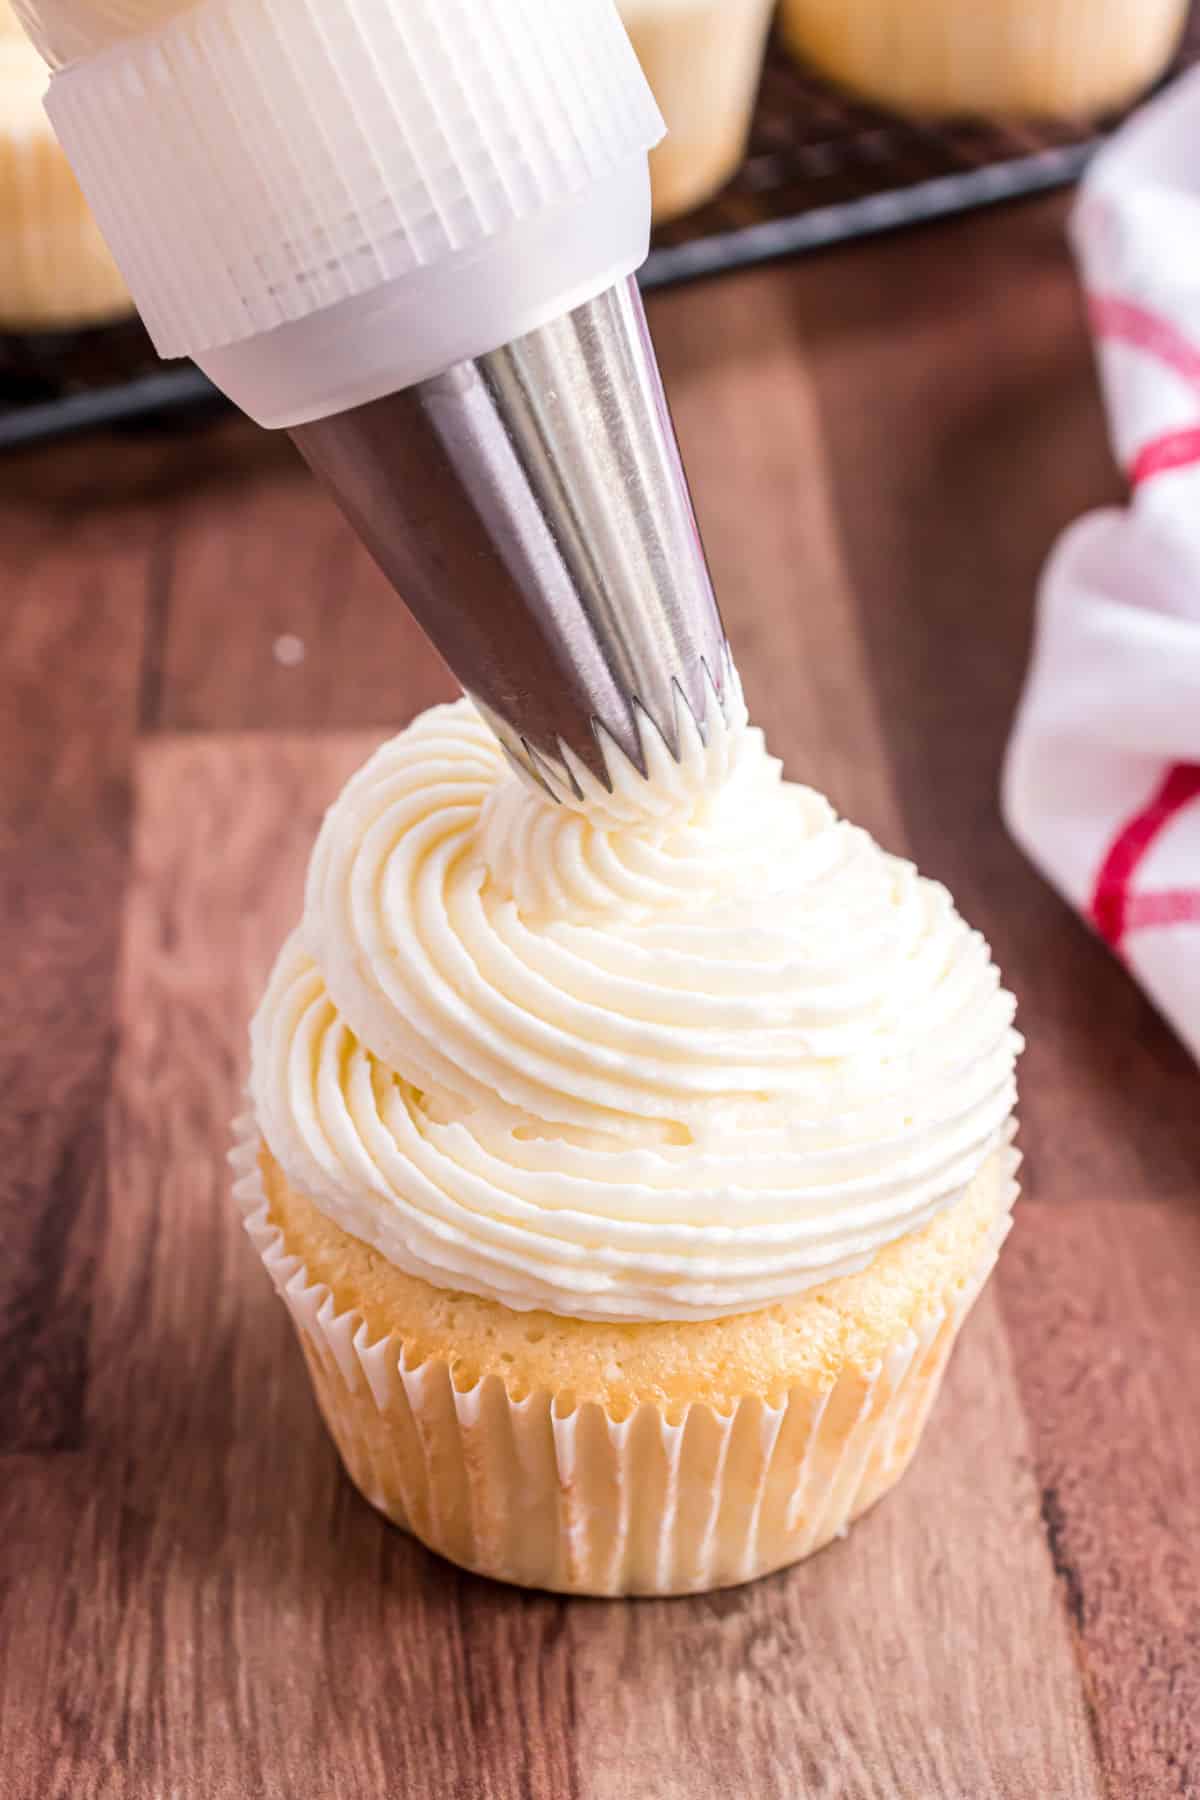 Almond cupcake being frosted with open tip bag.